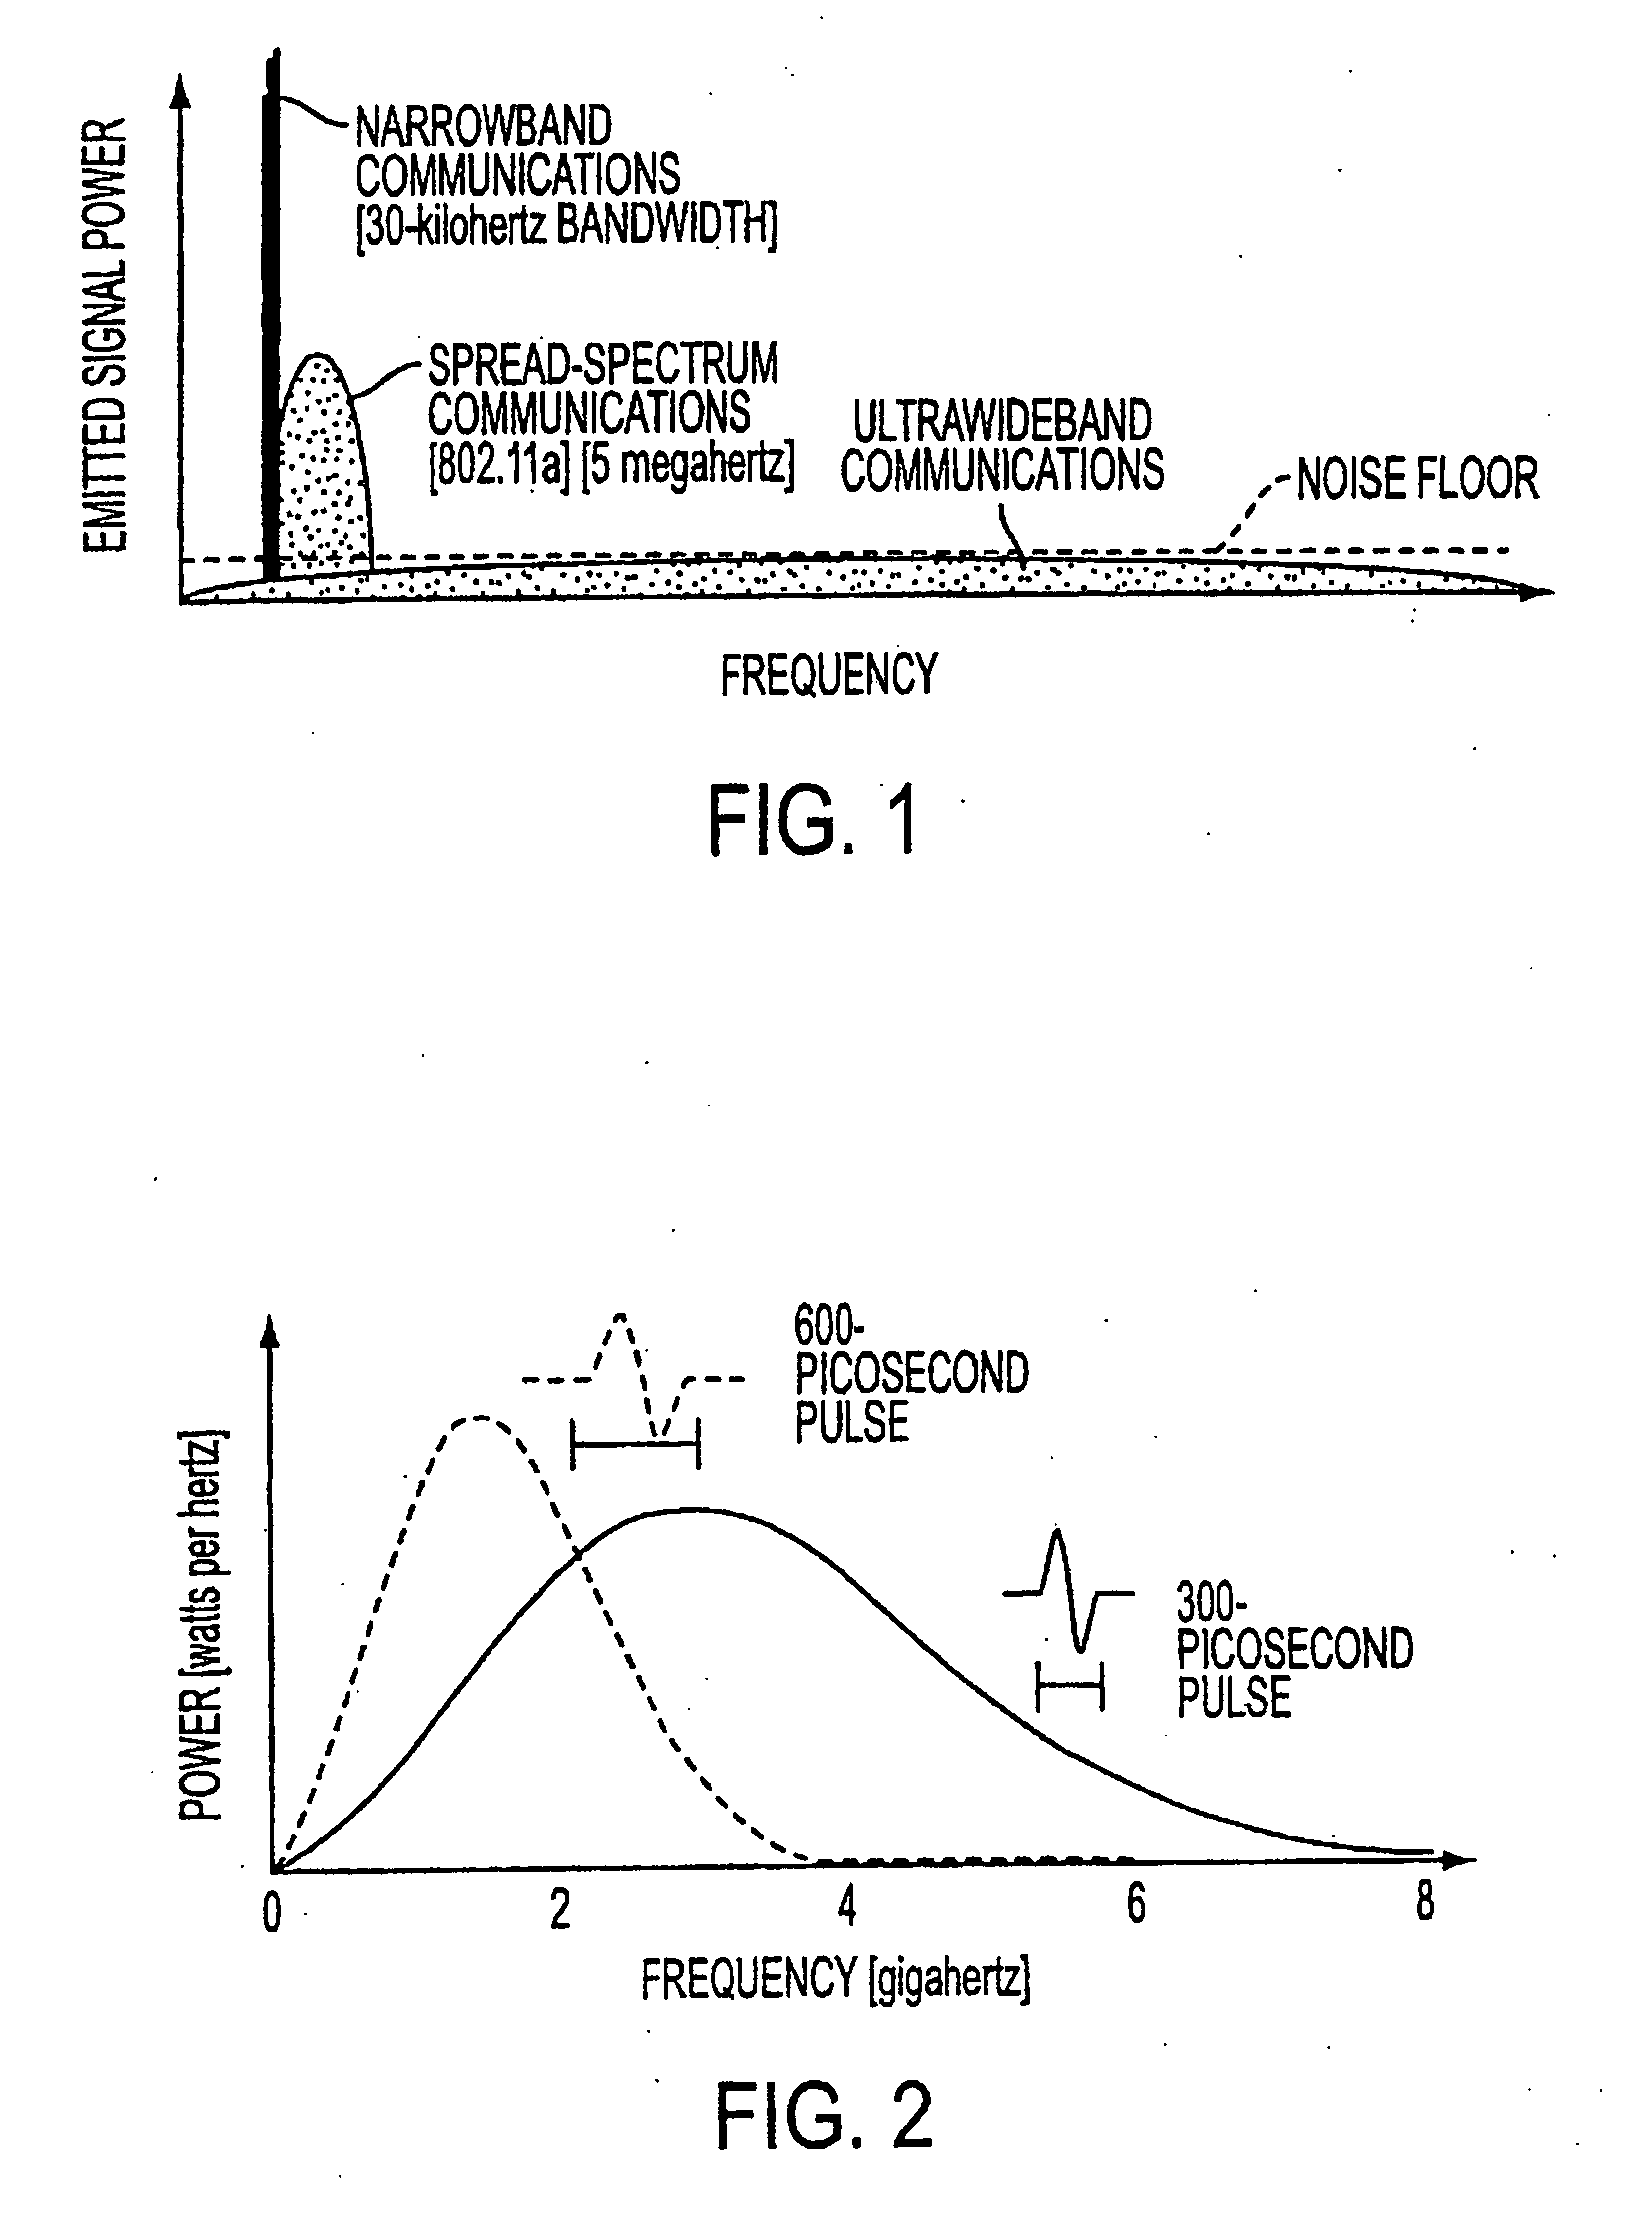 Ultra-wideband pulse modulation system and method